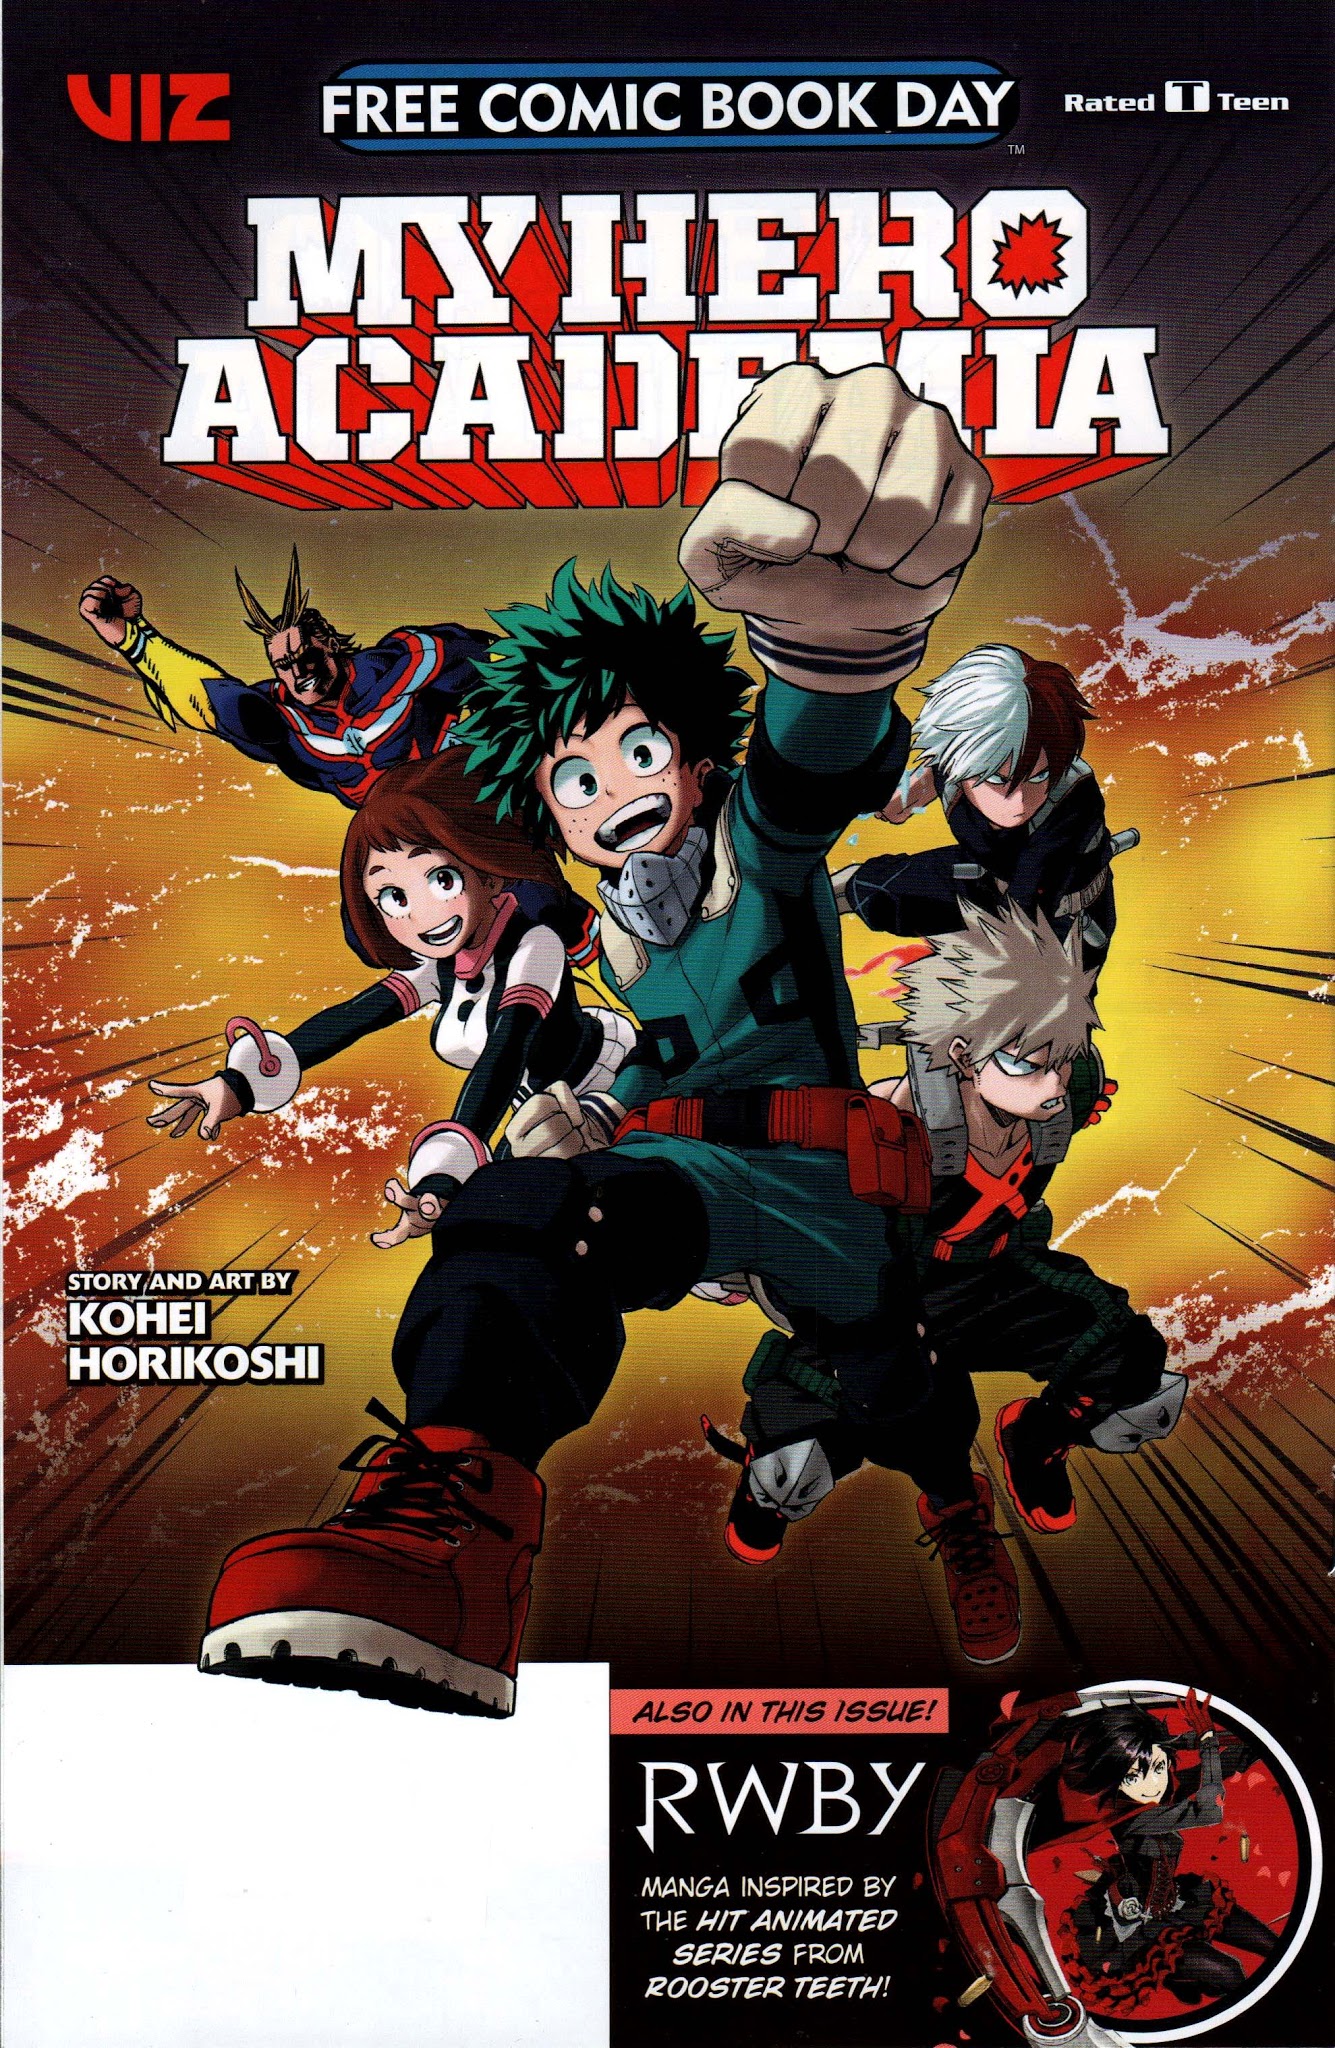 Read online Free Comic Book Day 2018 comic -  Issue # My Hero Academia - RWBY - 1